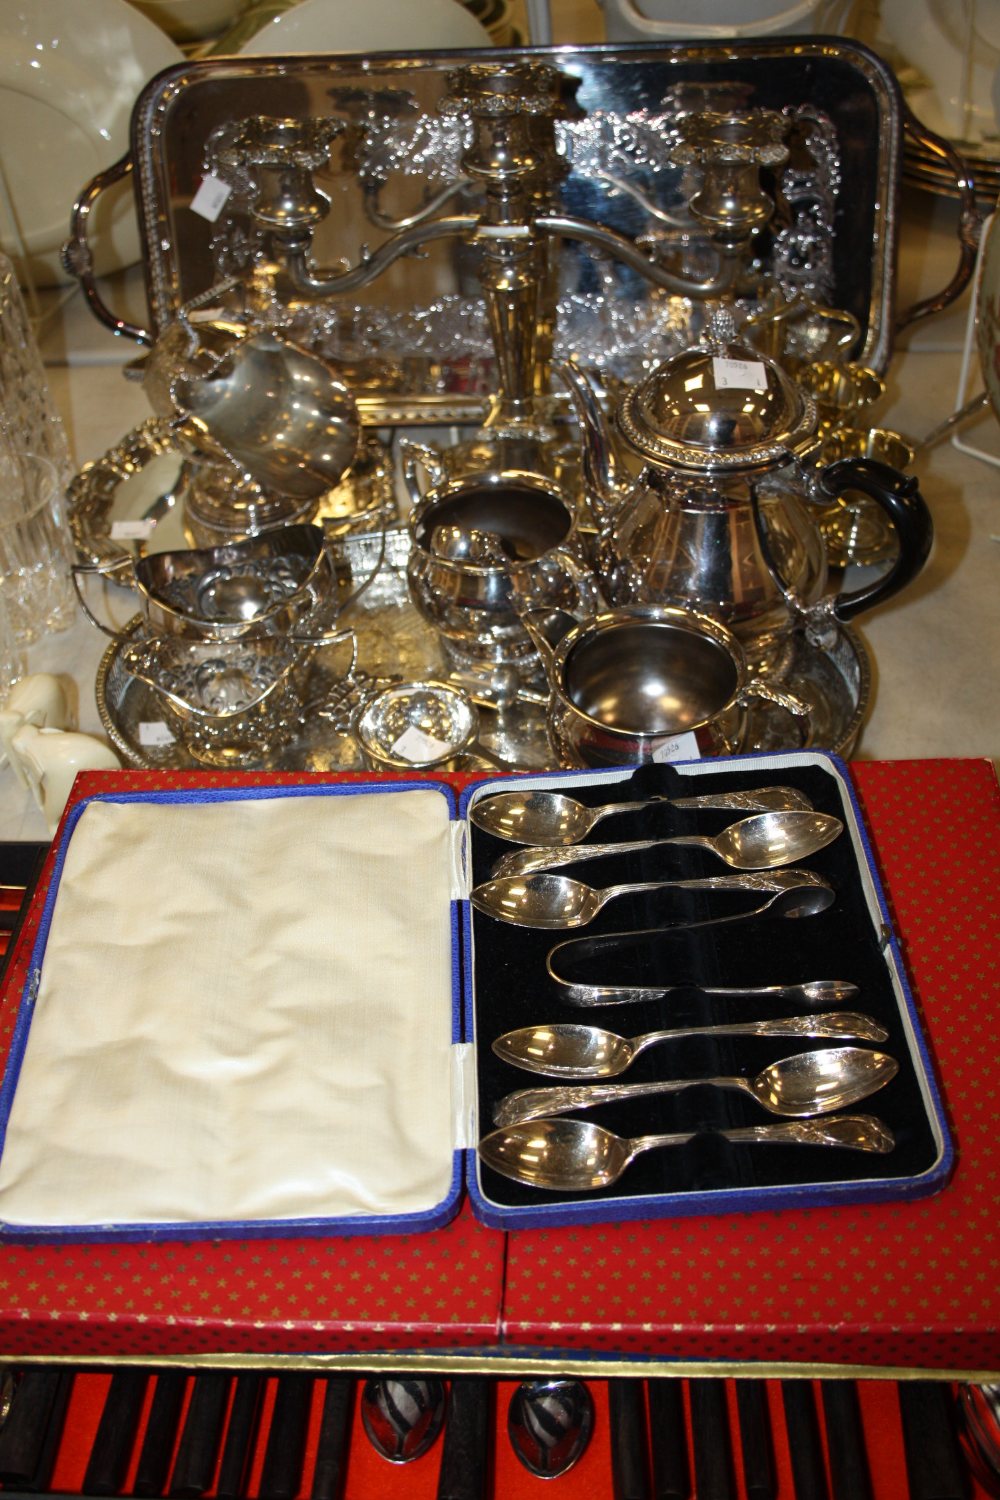 Silver plated ware - gallery trays, table candelabrum; flatware; etc